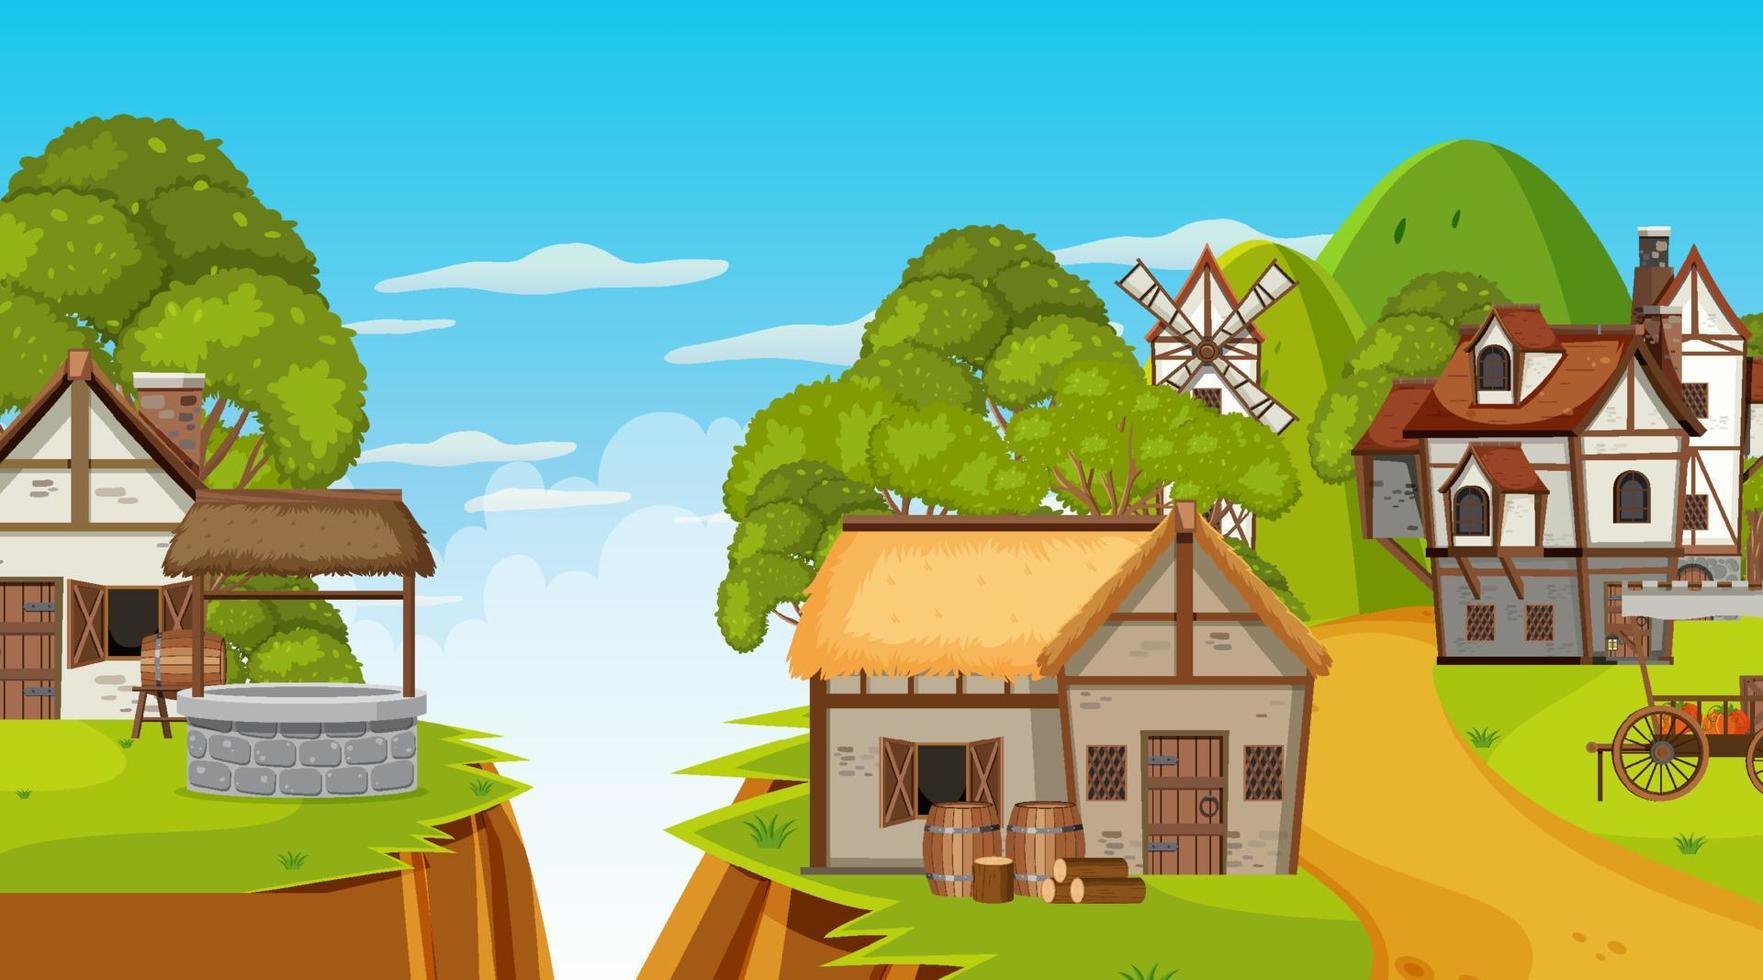 Medieval town scene background vector